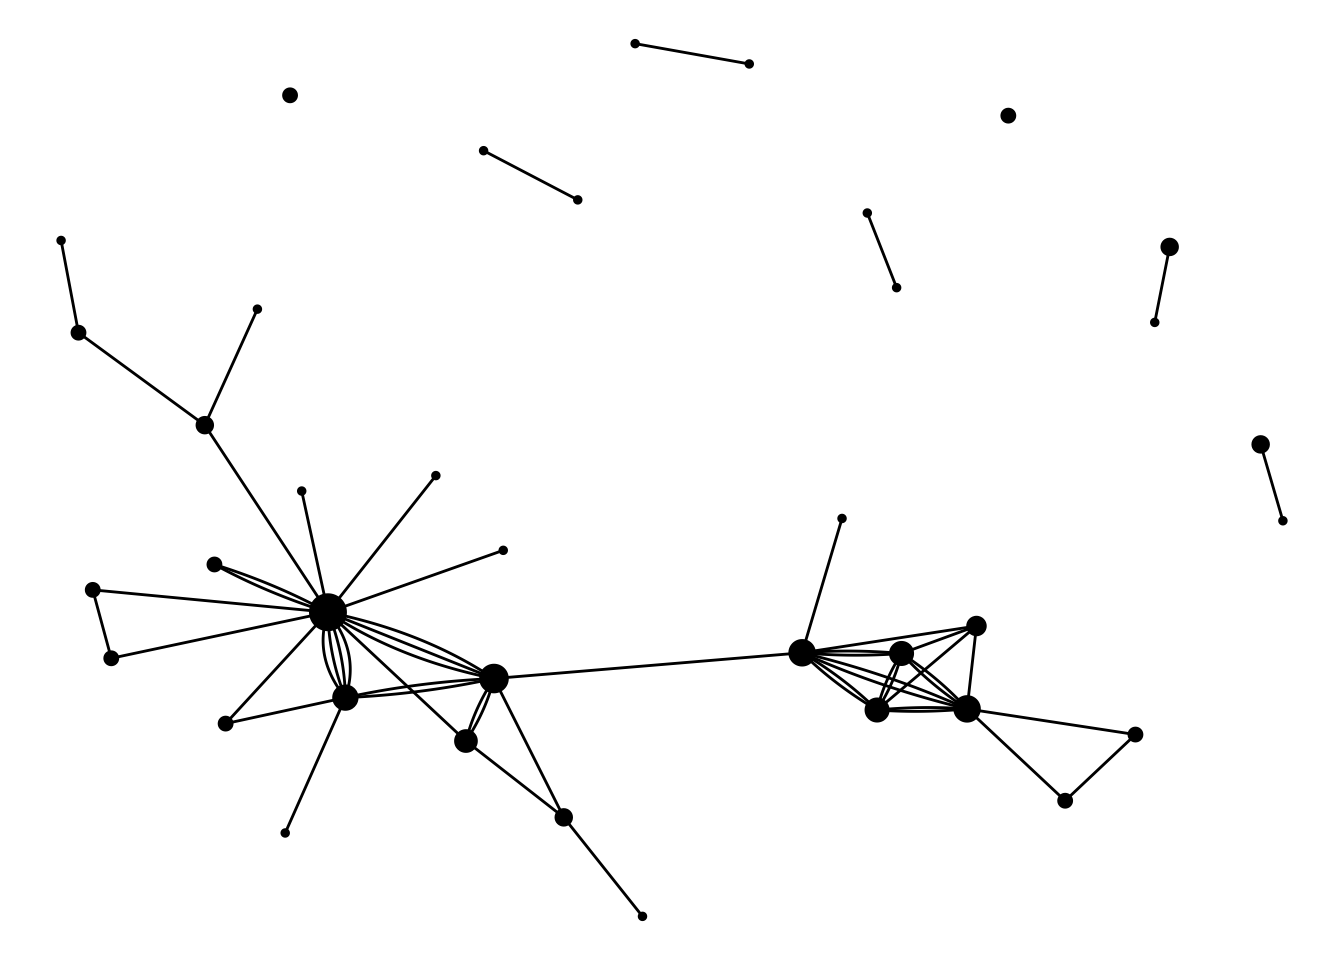 A network graph. There's one interconnected group with over 20 nodes, 5 isolated pairs and two isolated singletons.